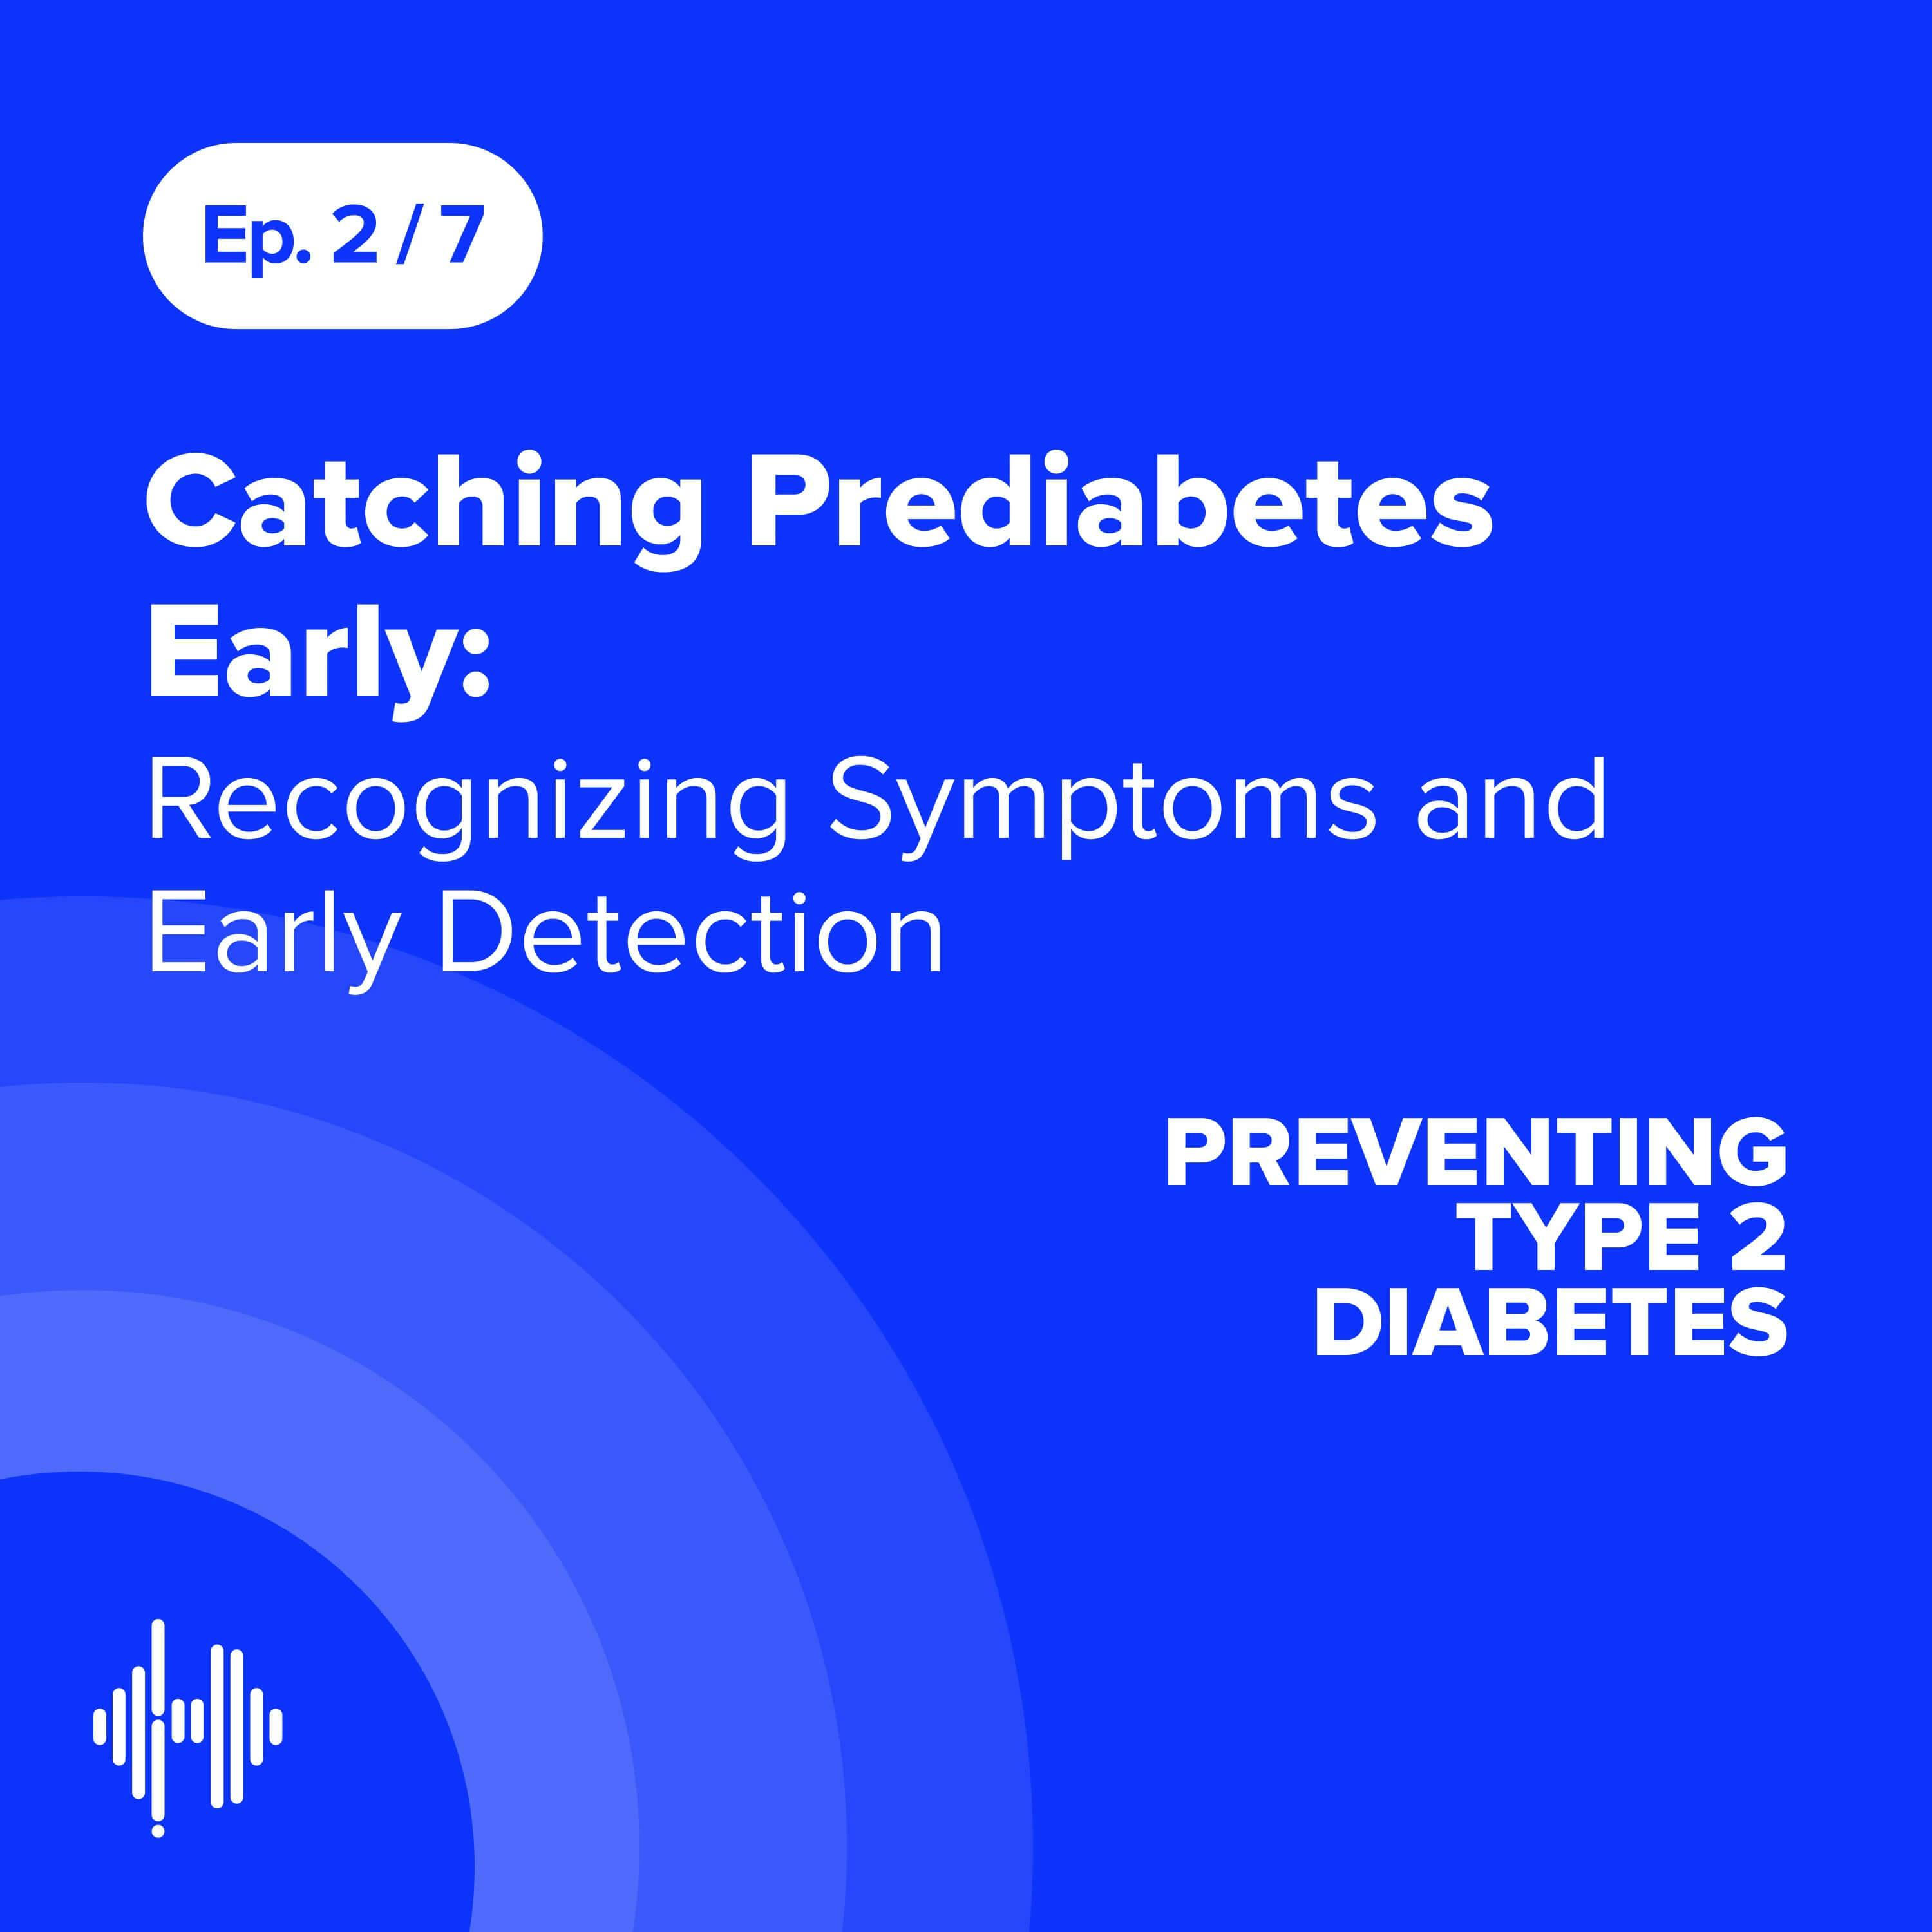 Ep 2: Catching Prediabetes Early: Recognizing Symptoms and Early Detection